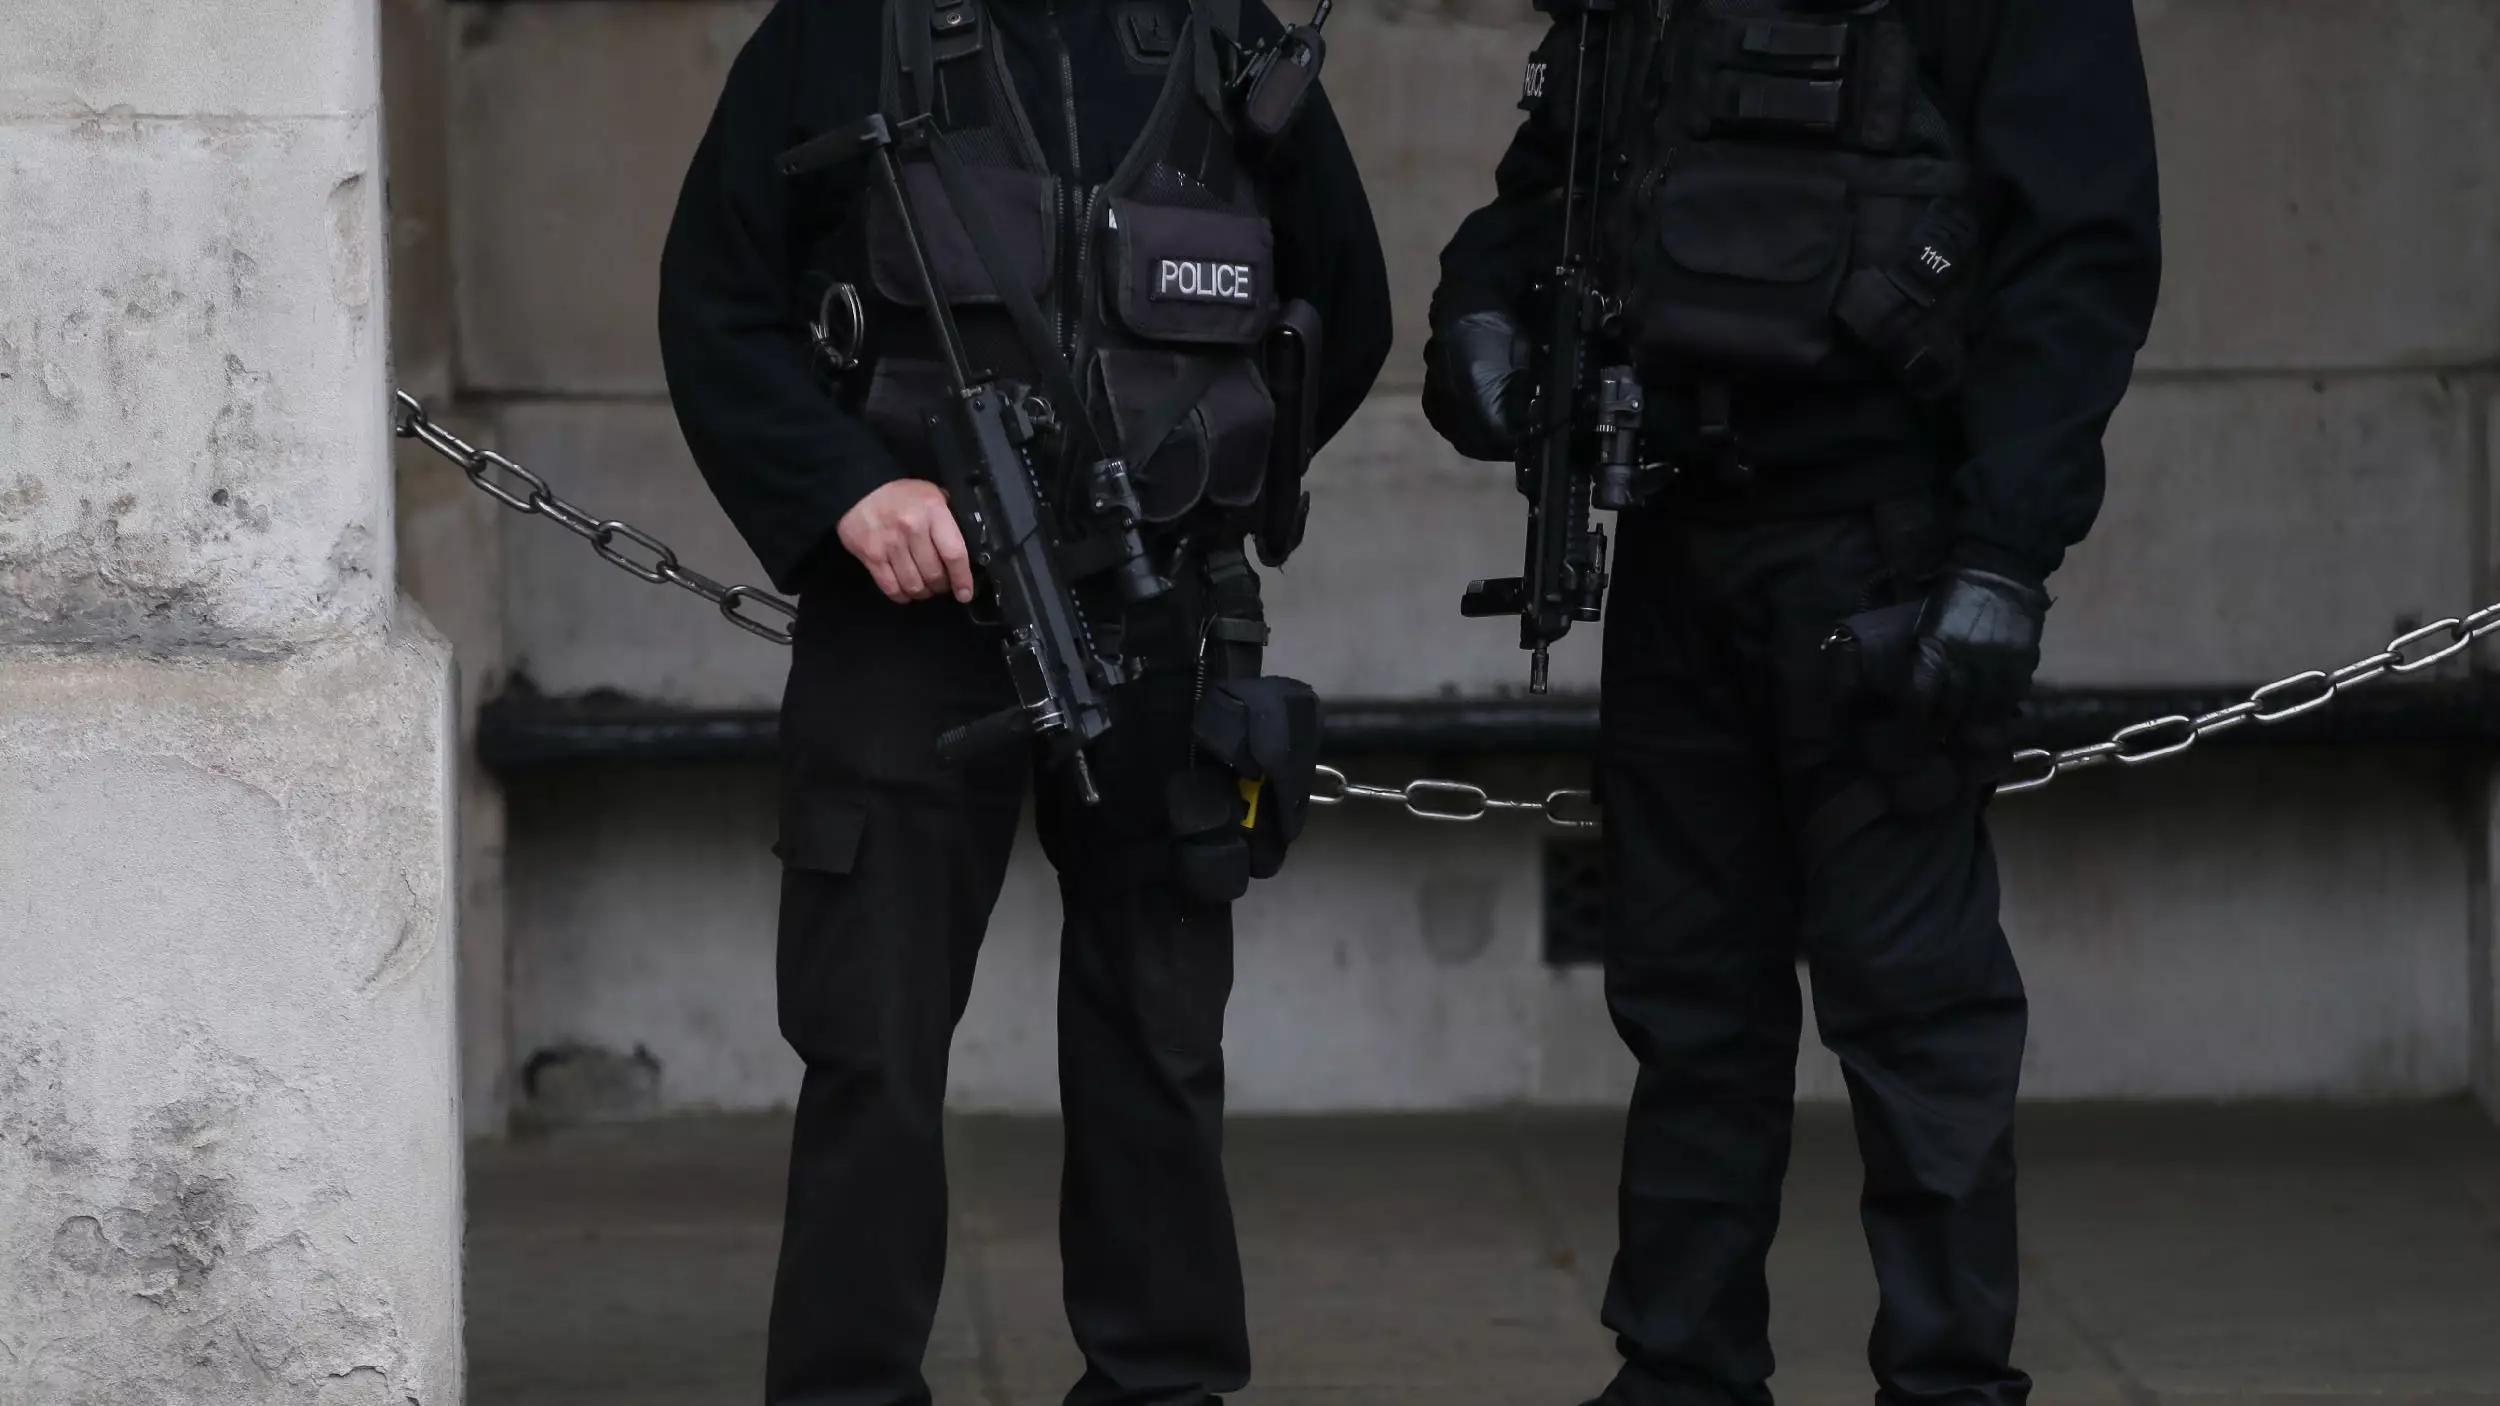 LADbible Asks: Should All British Police Be Armed?